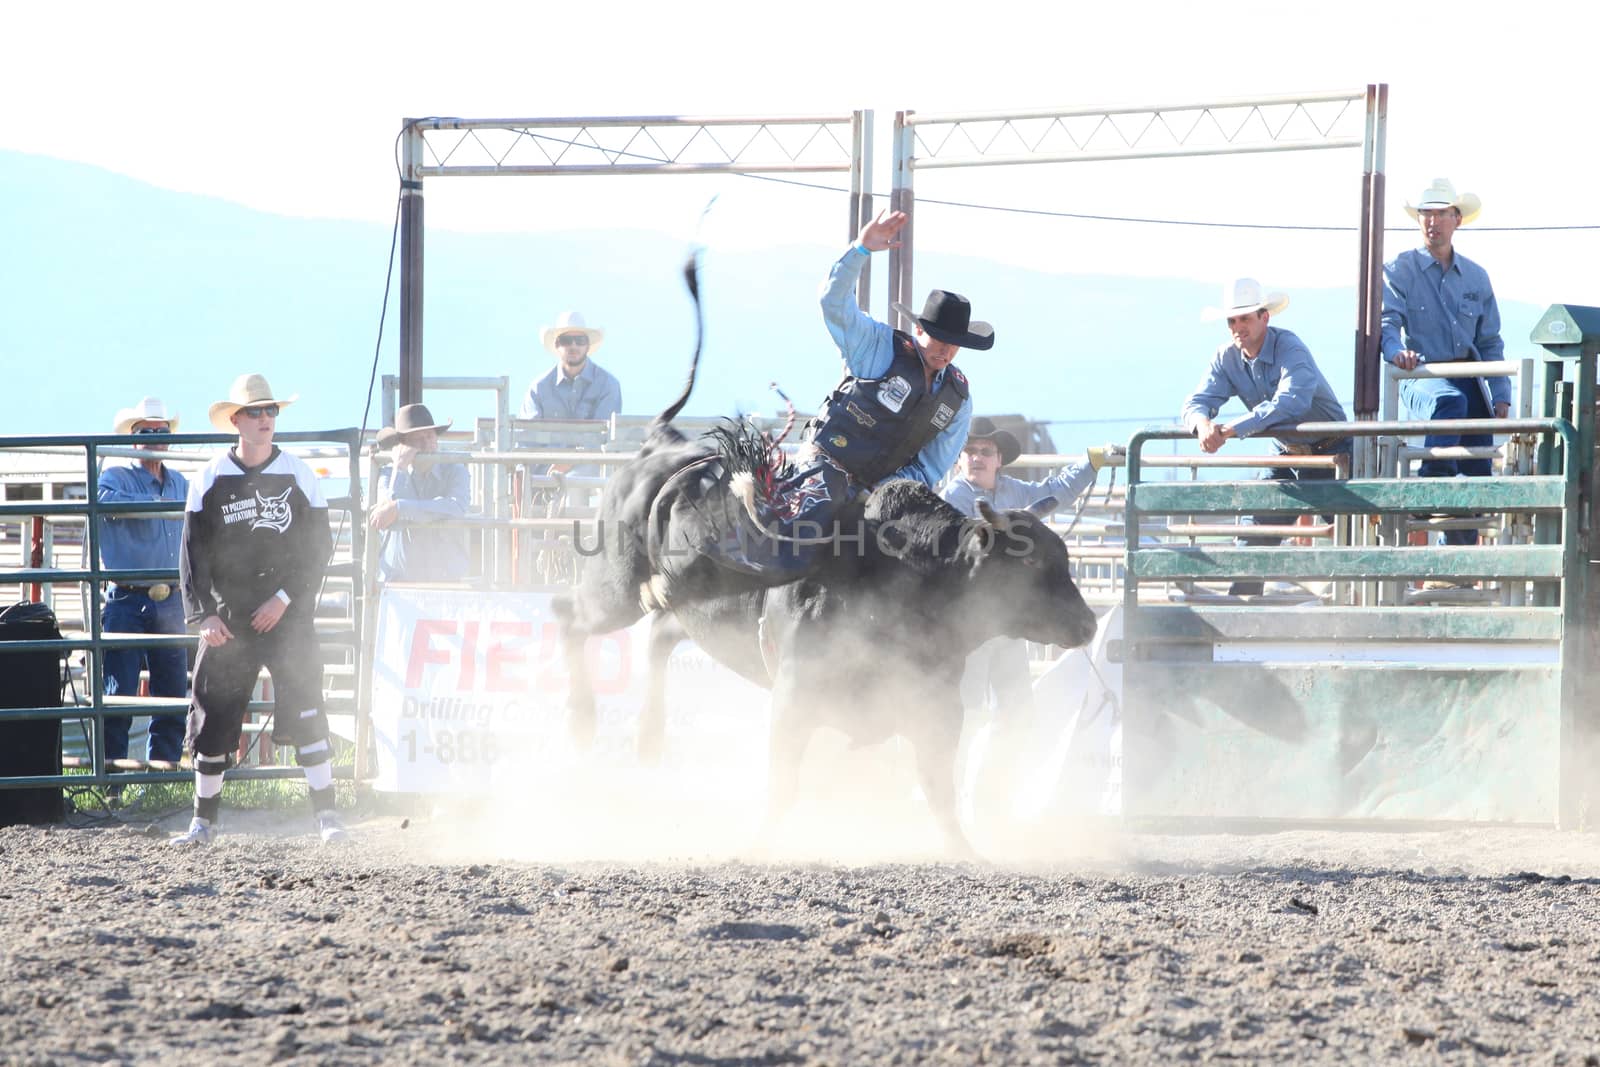 MERRITT, B.C. CANADA - May 30, 2015: Bull rider riding in the first round of The 3rd Annual Ty Pozzobon Invitational PBR Event.